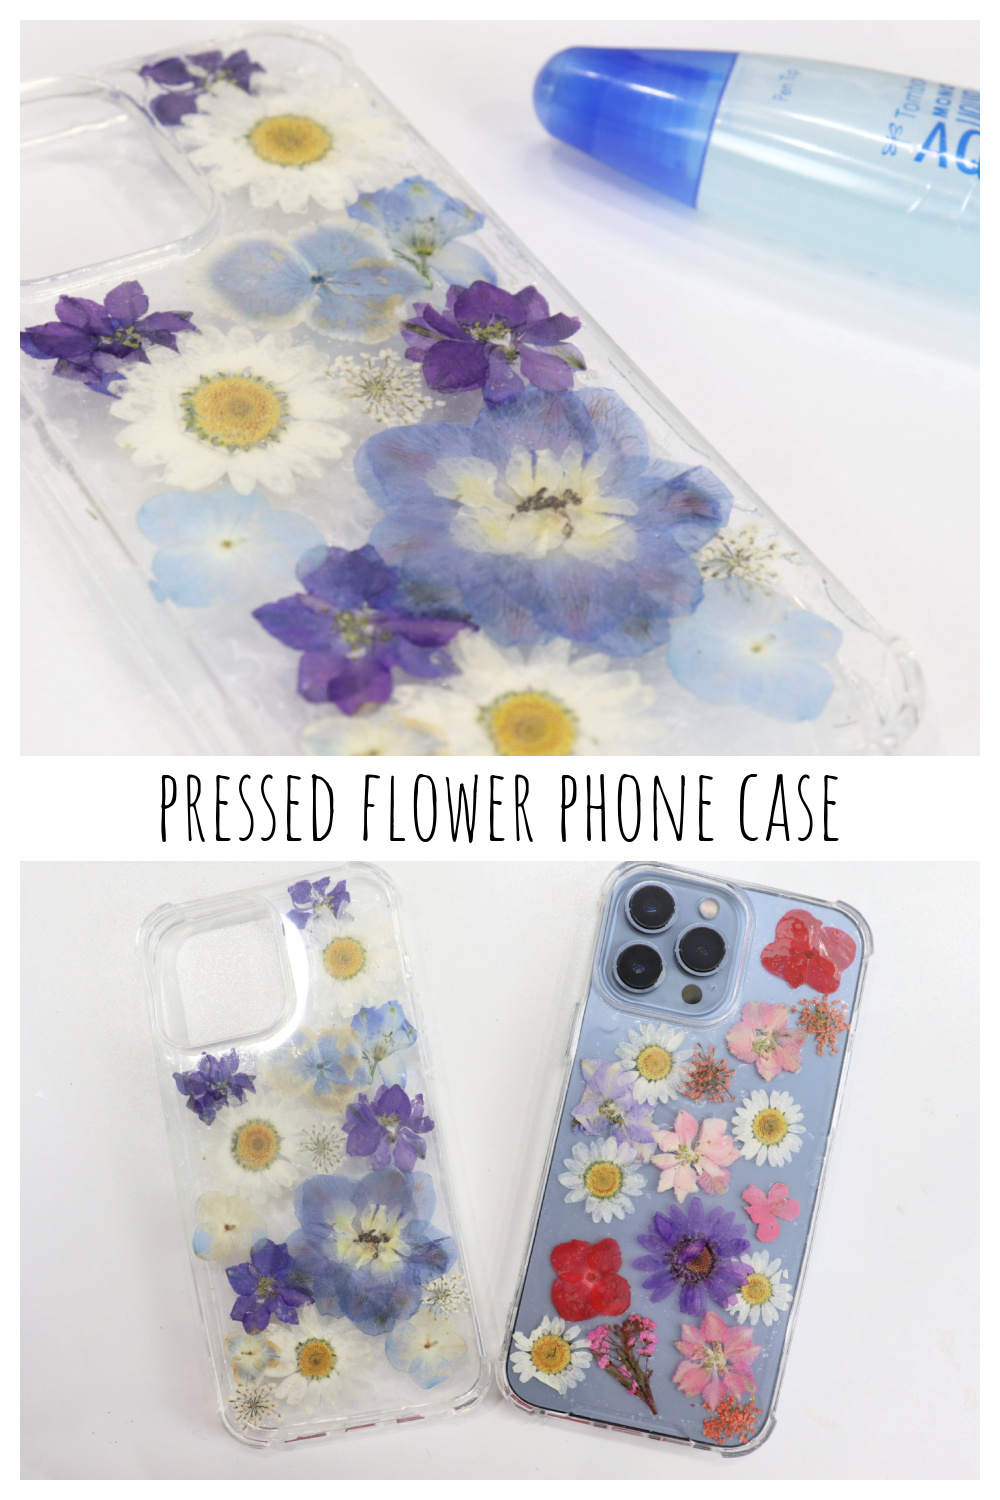 Use pressed flowers to decorate a clear phone case and make a natural spring craft with @amylattacreations. Image is a collage of project photos designed for Pinterest.